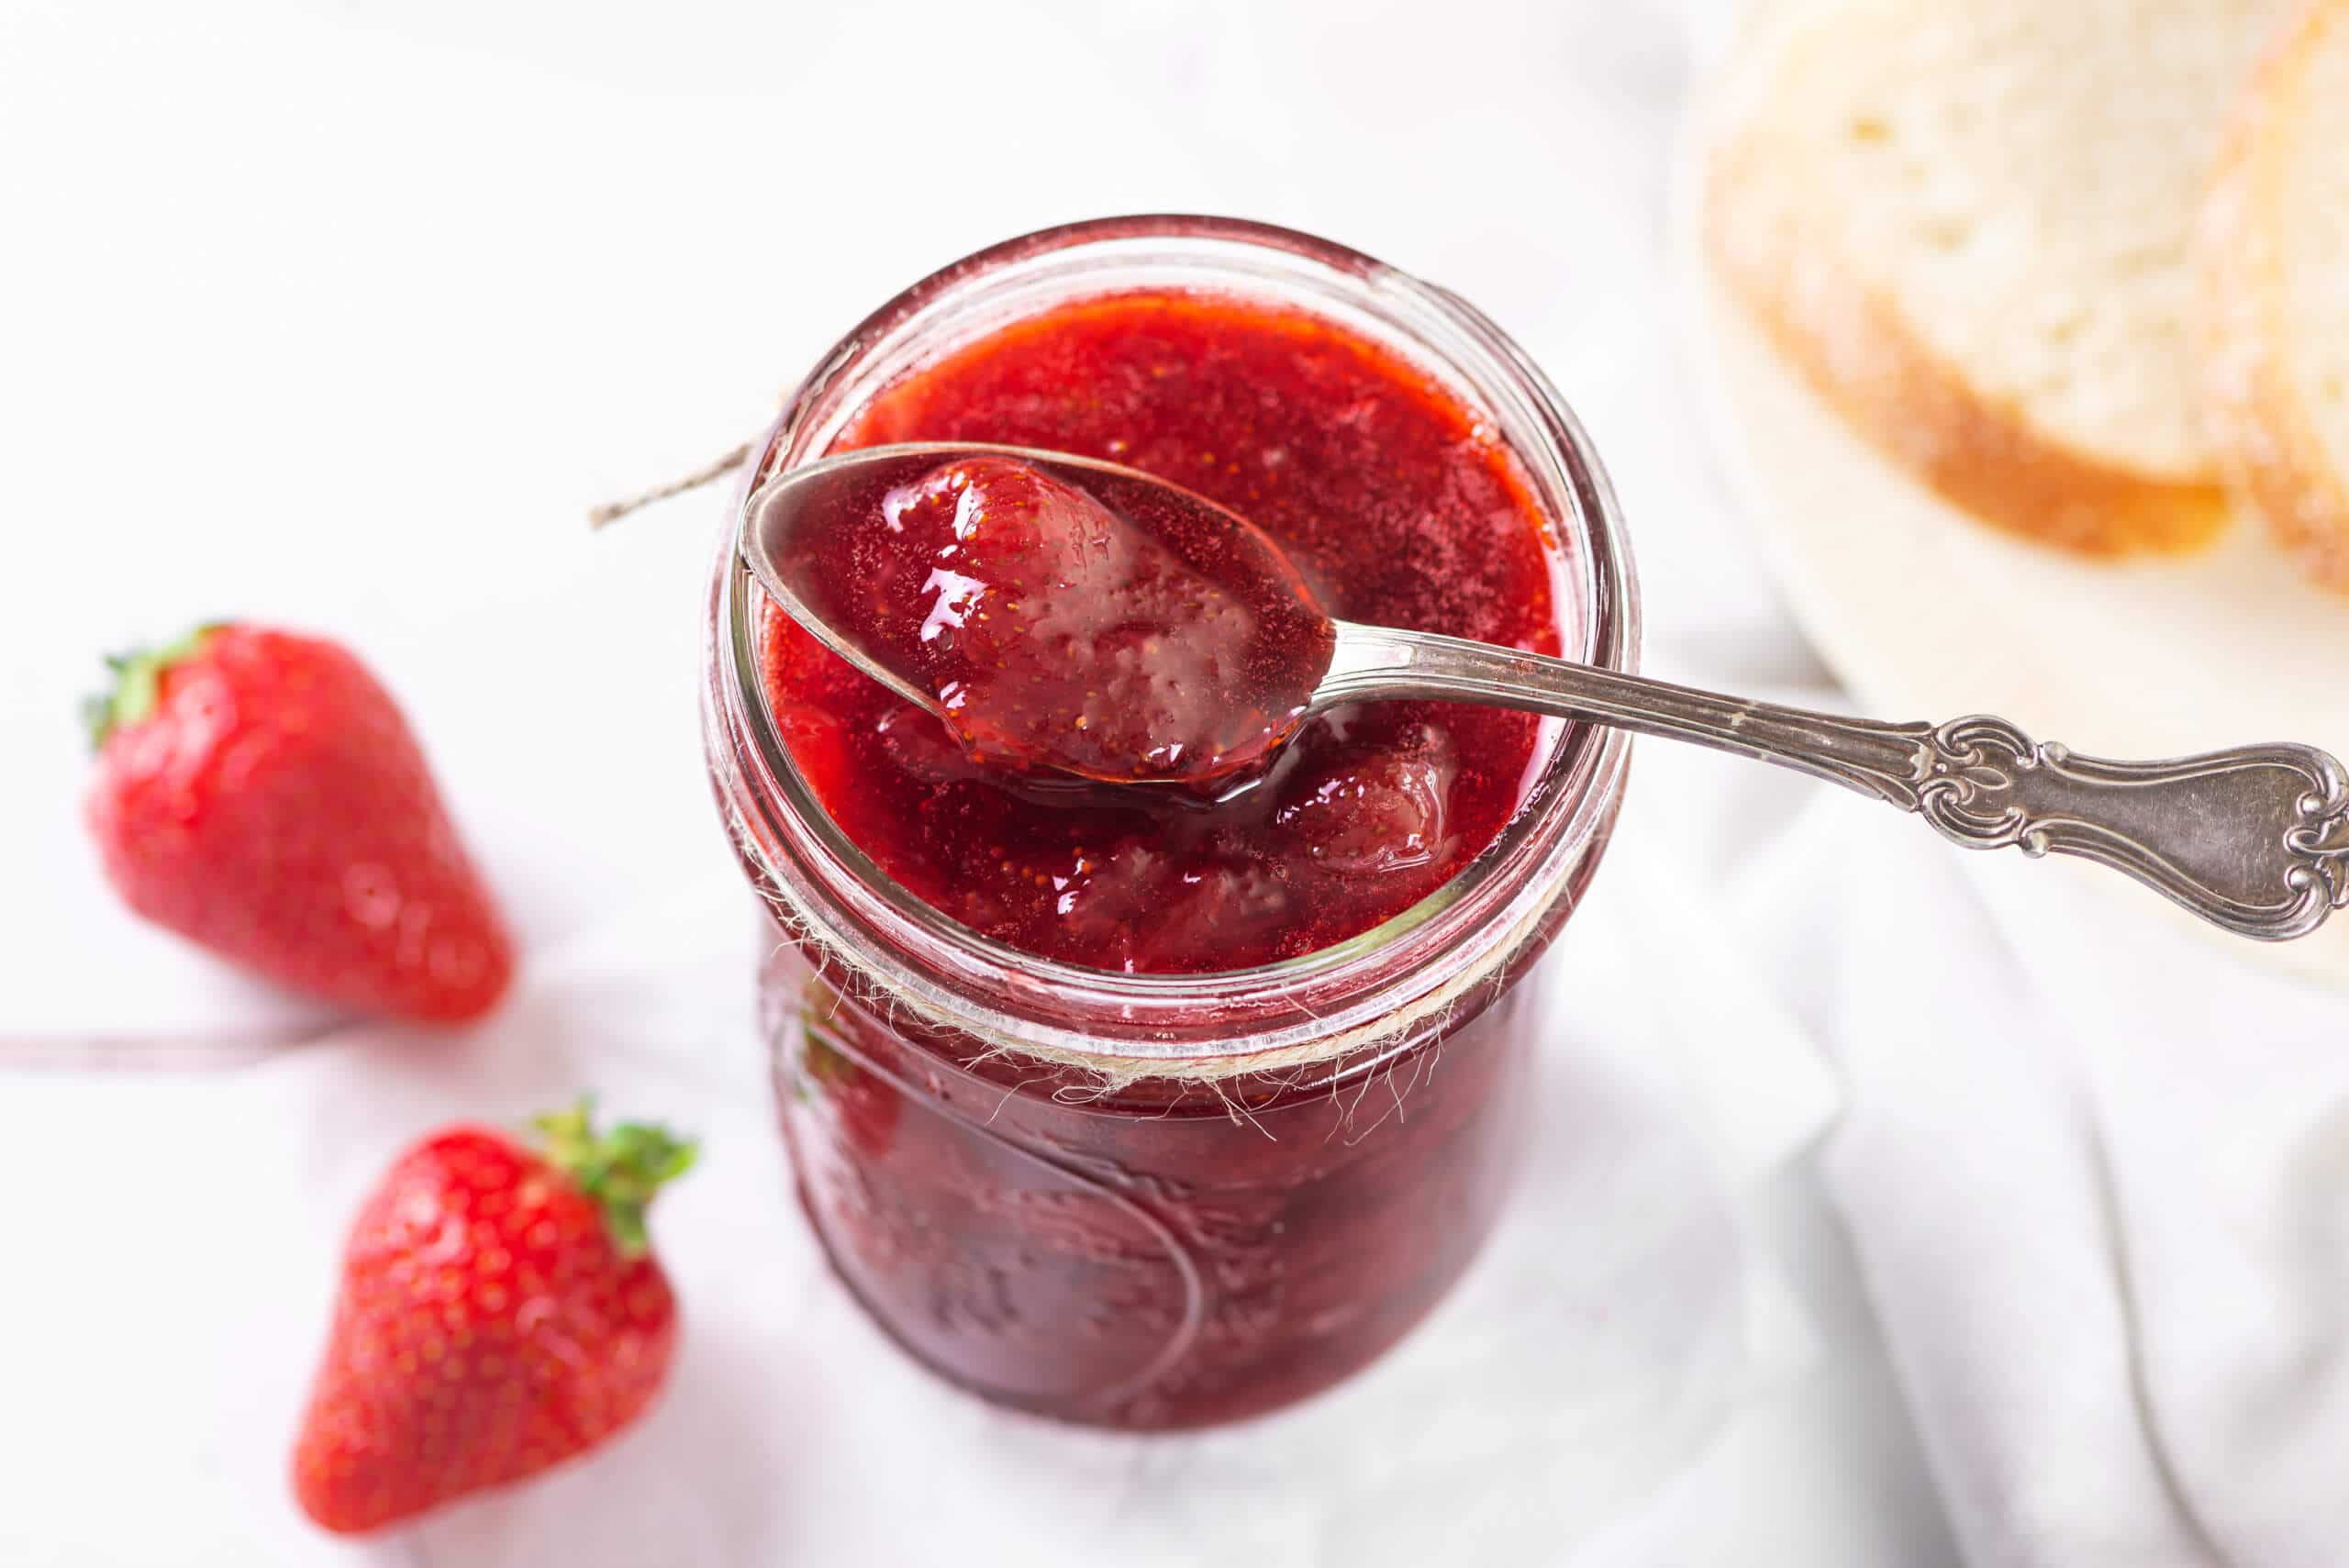 Simple 2 Ingredient Strawberry Jam from Scratch